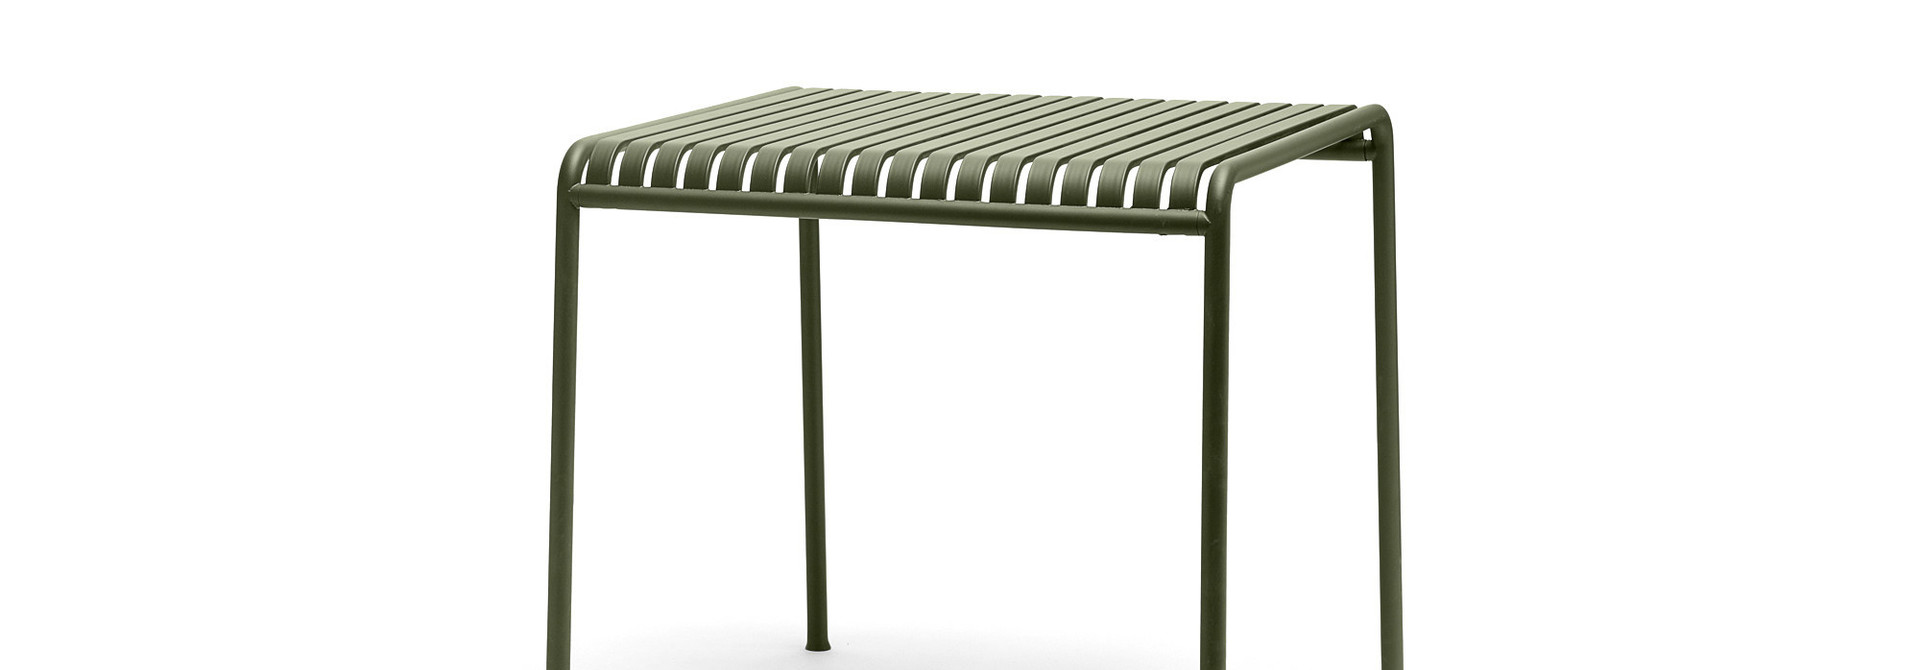 Palissade Table S